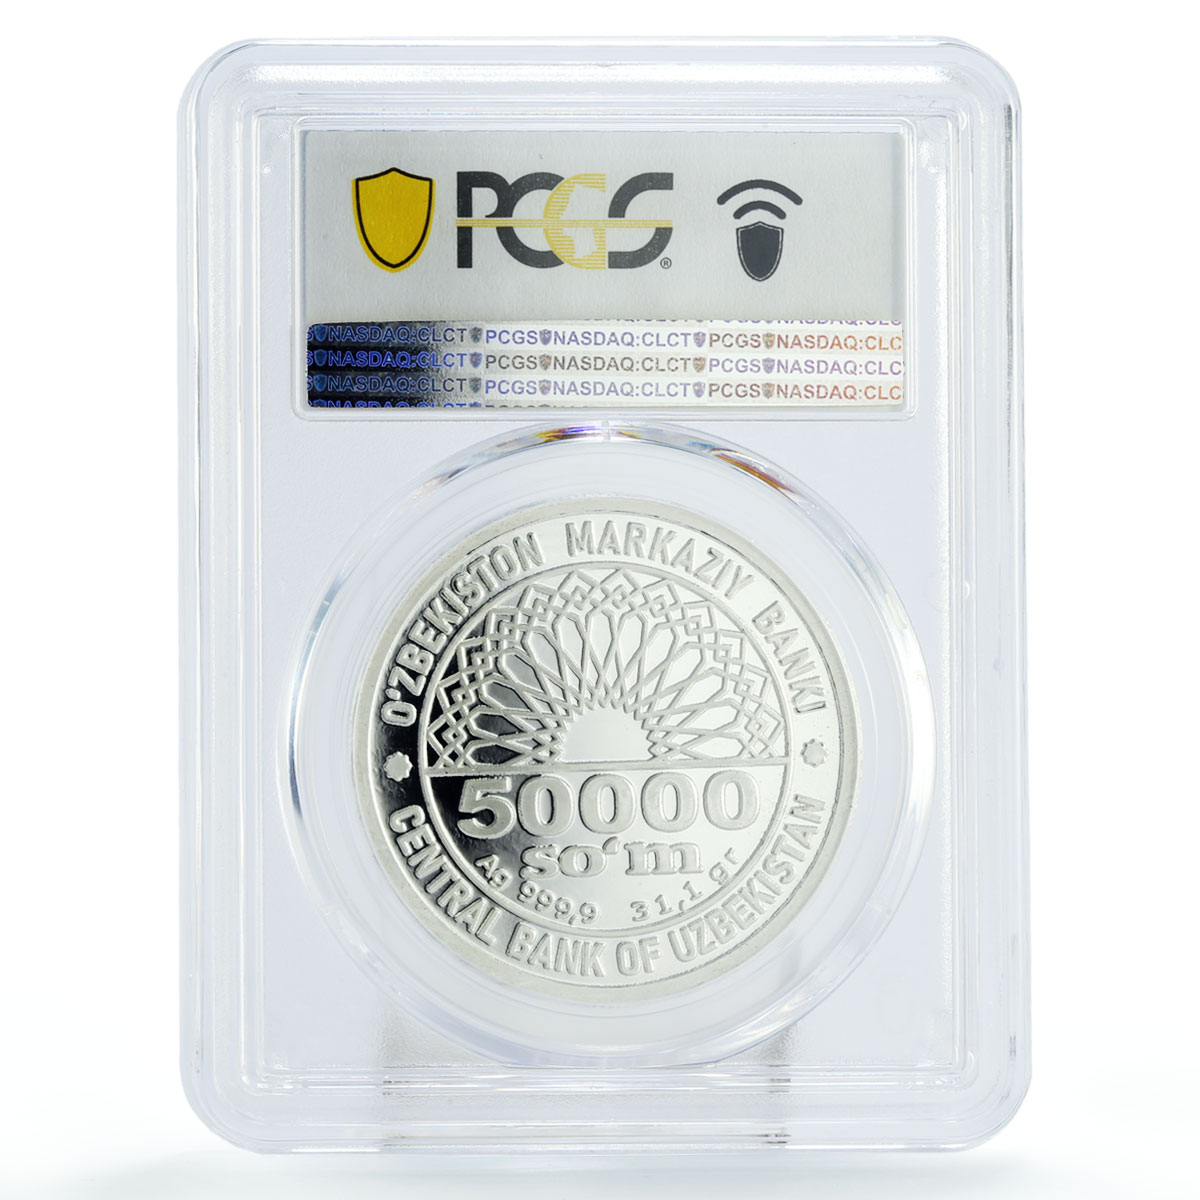 Uzbekistan 50000 som 30th National Independence Day PR68 PCGS silver coin 2021